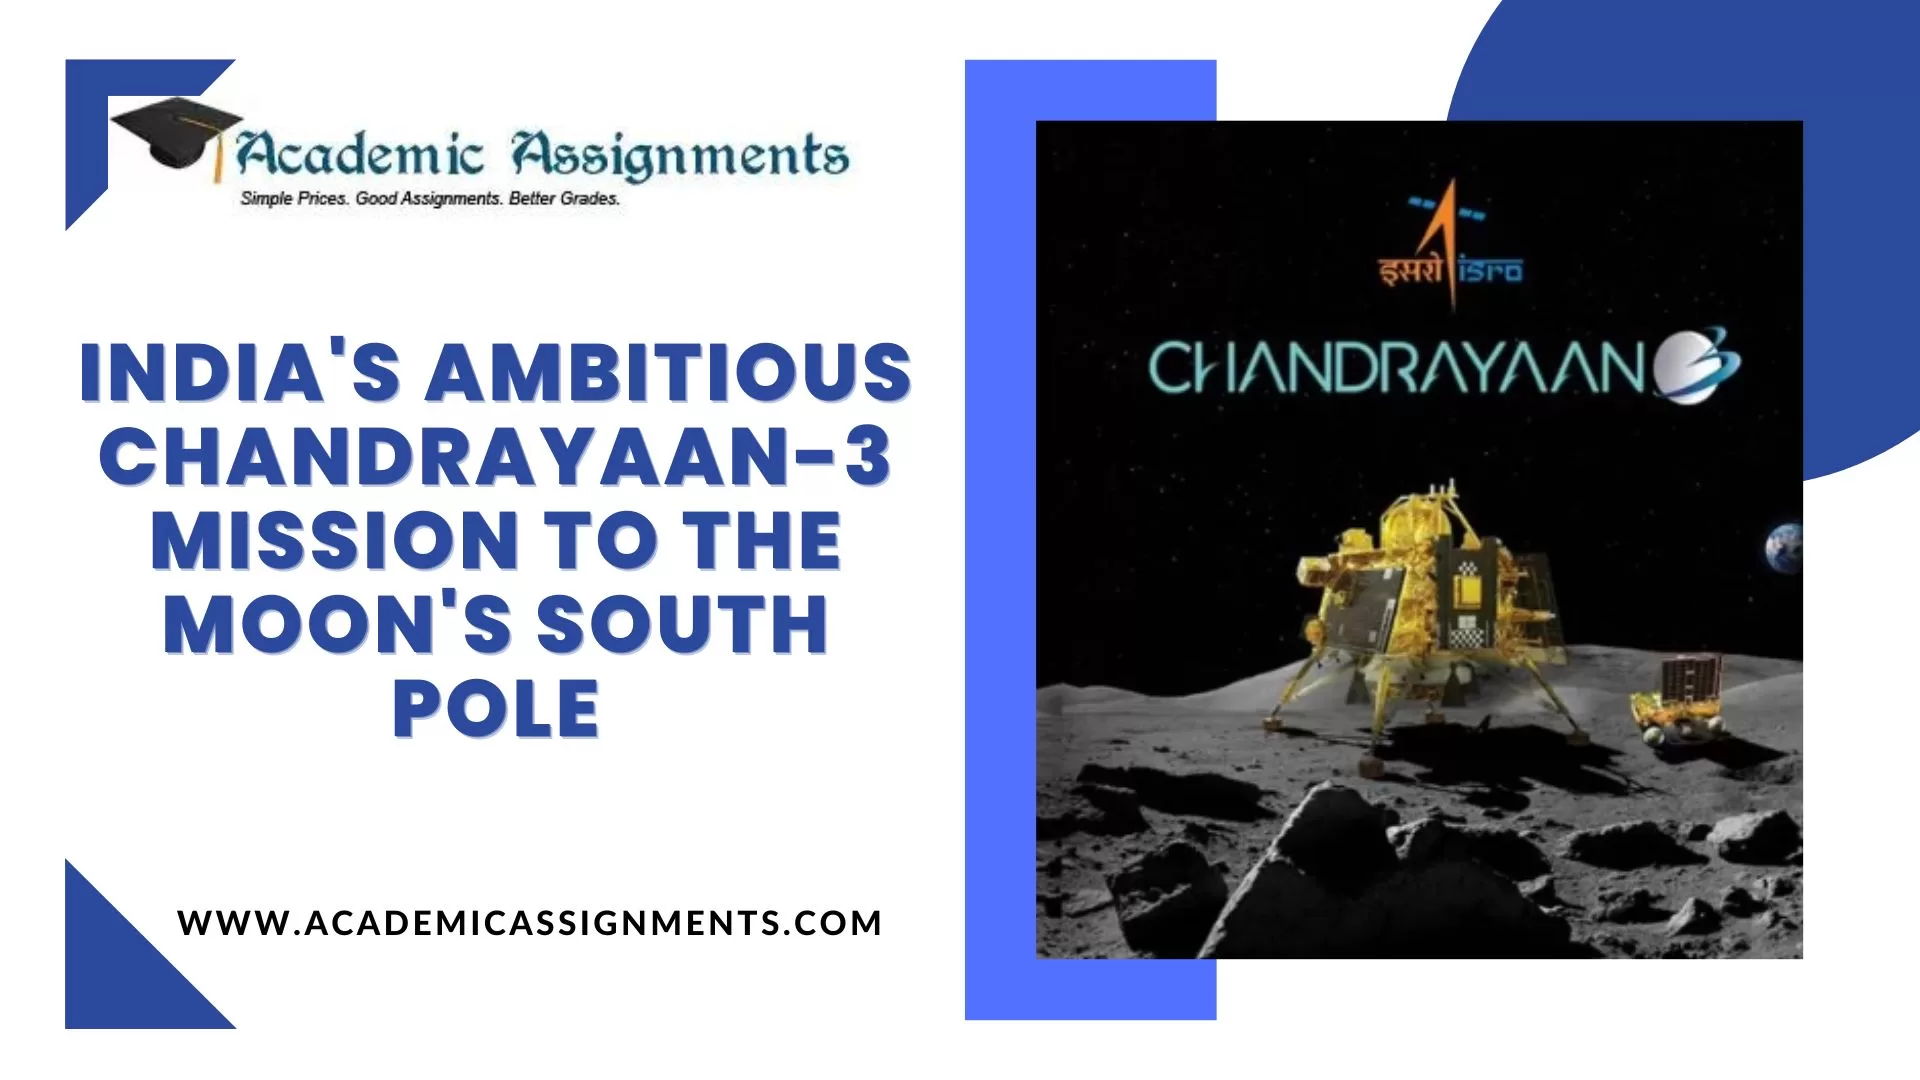 India's Ambitious Chandrayaan-3 Mission to the Moon's South Pole